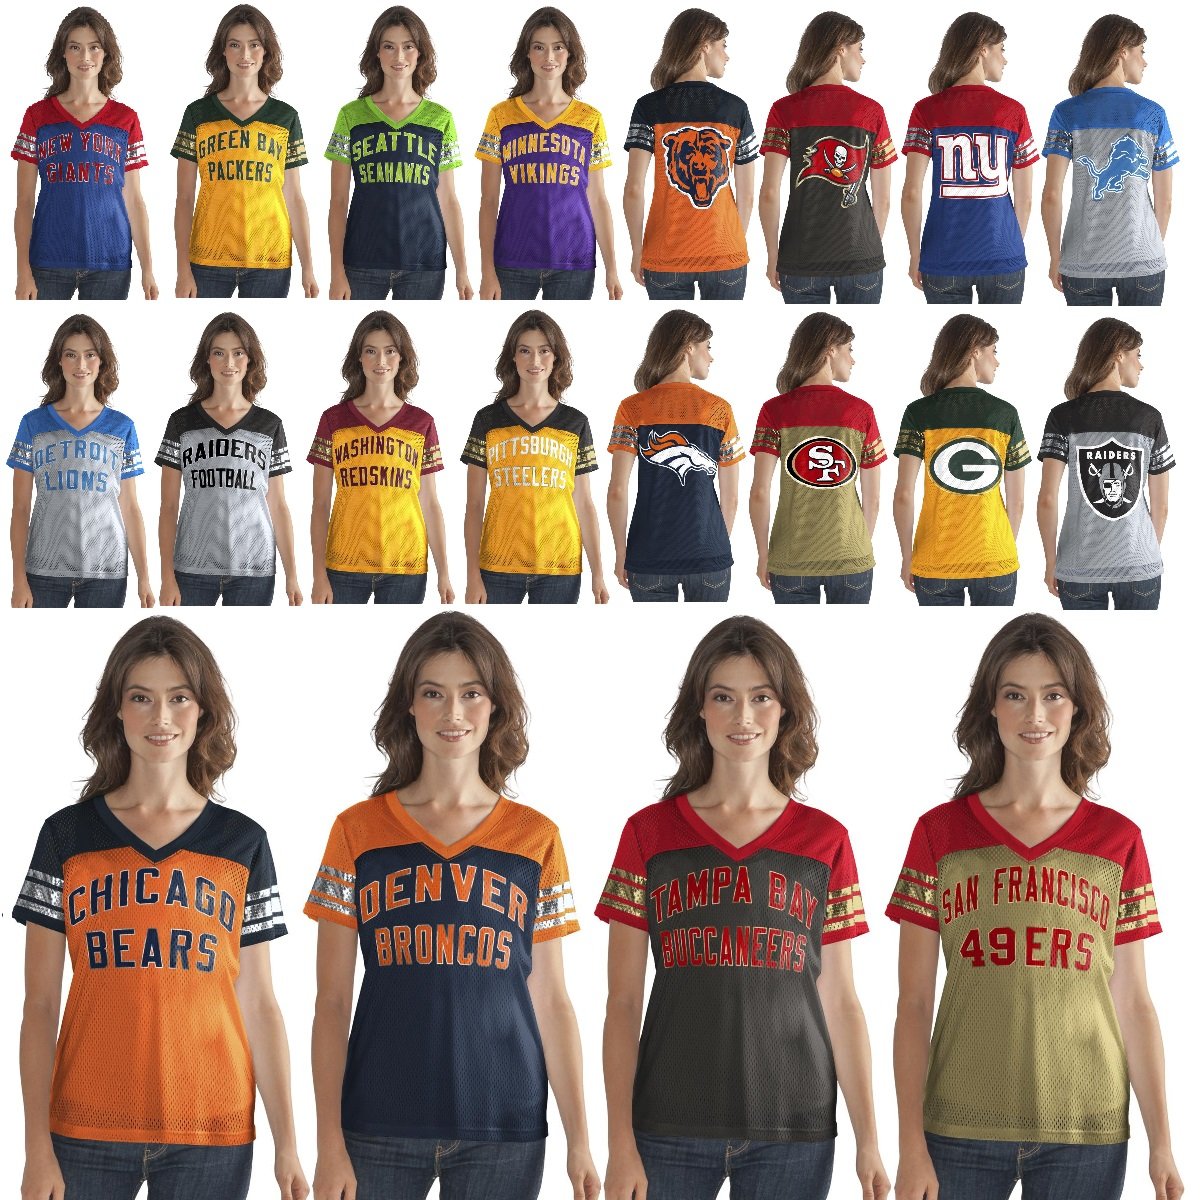 Officially Licensed NFL 2022 Jersey Knit Schedule Tee by Glll